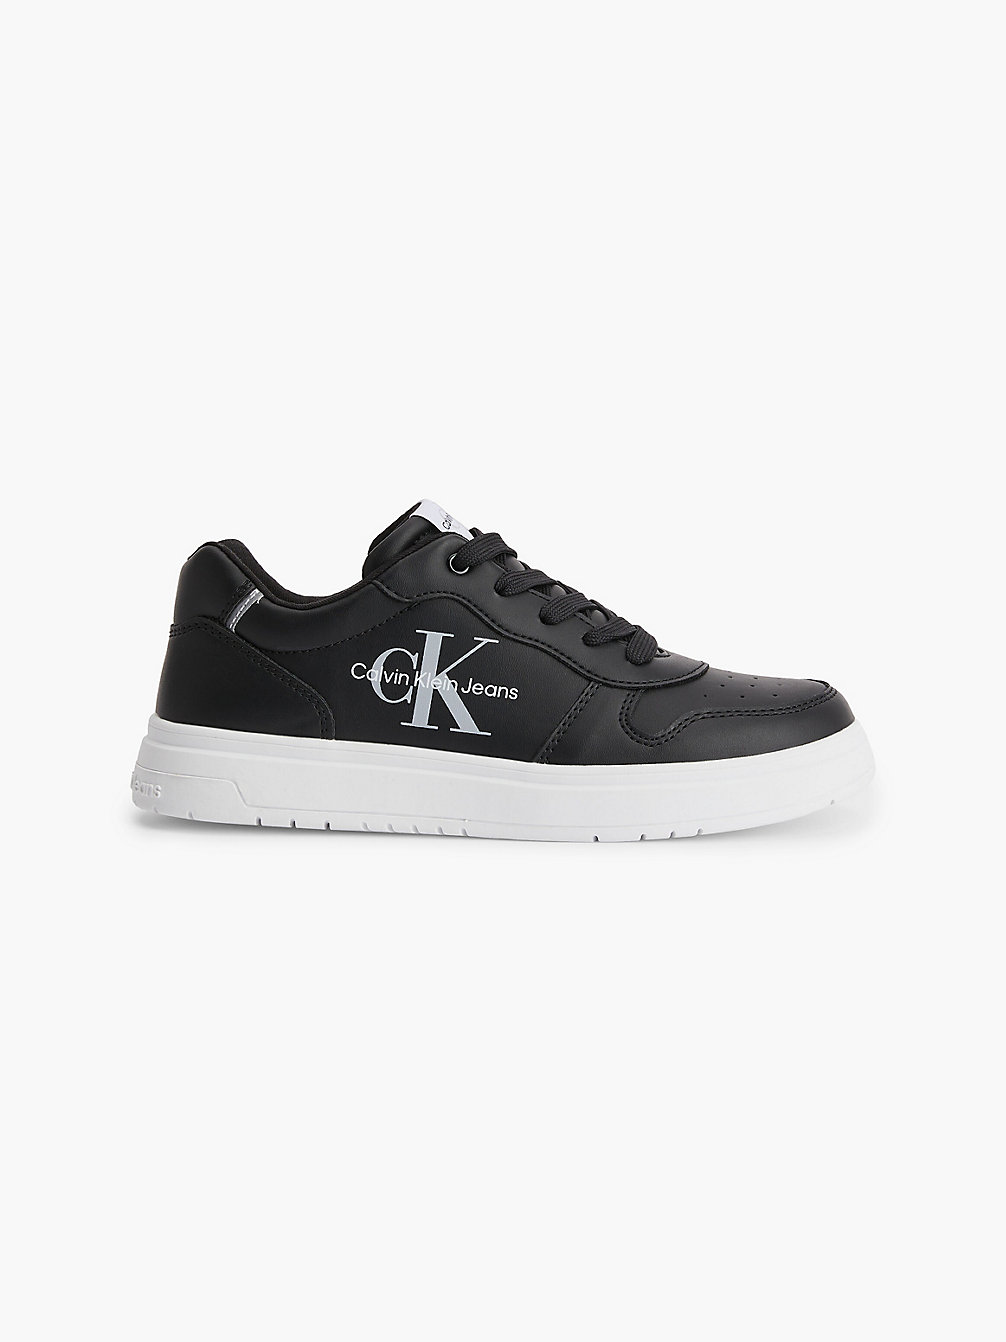 BLACK Recycled Trainers undefined kids unisex Calvin Klein